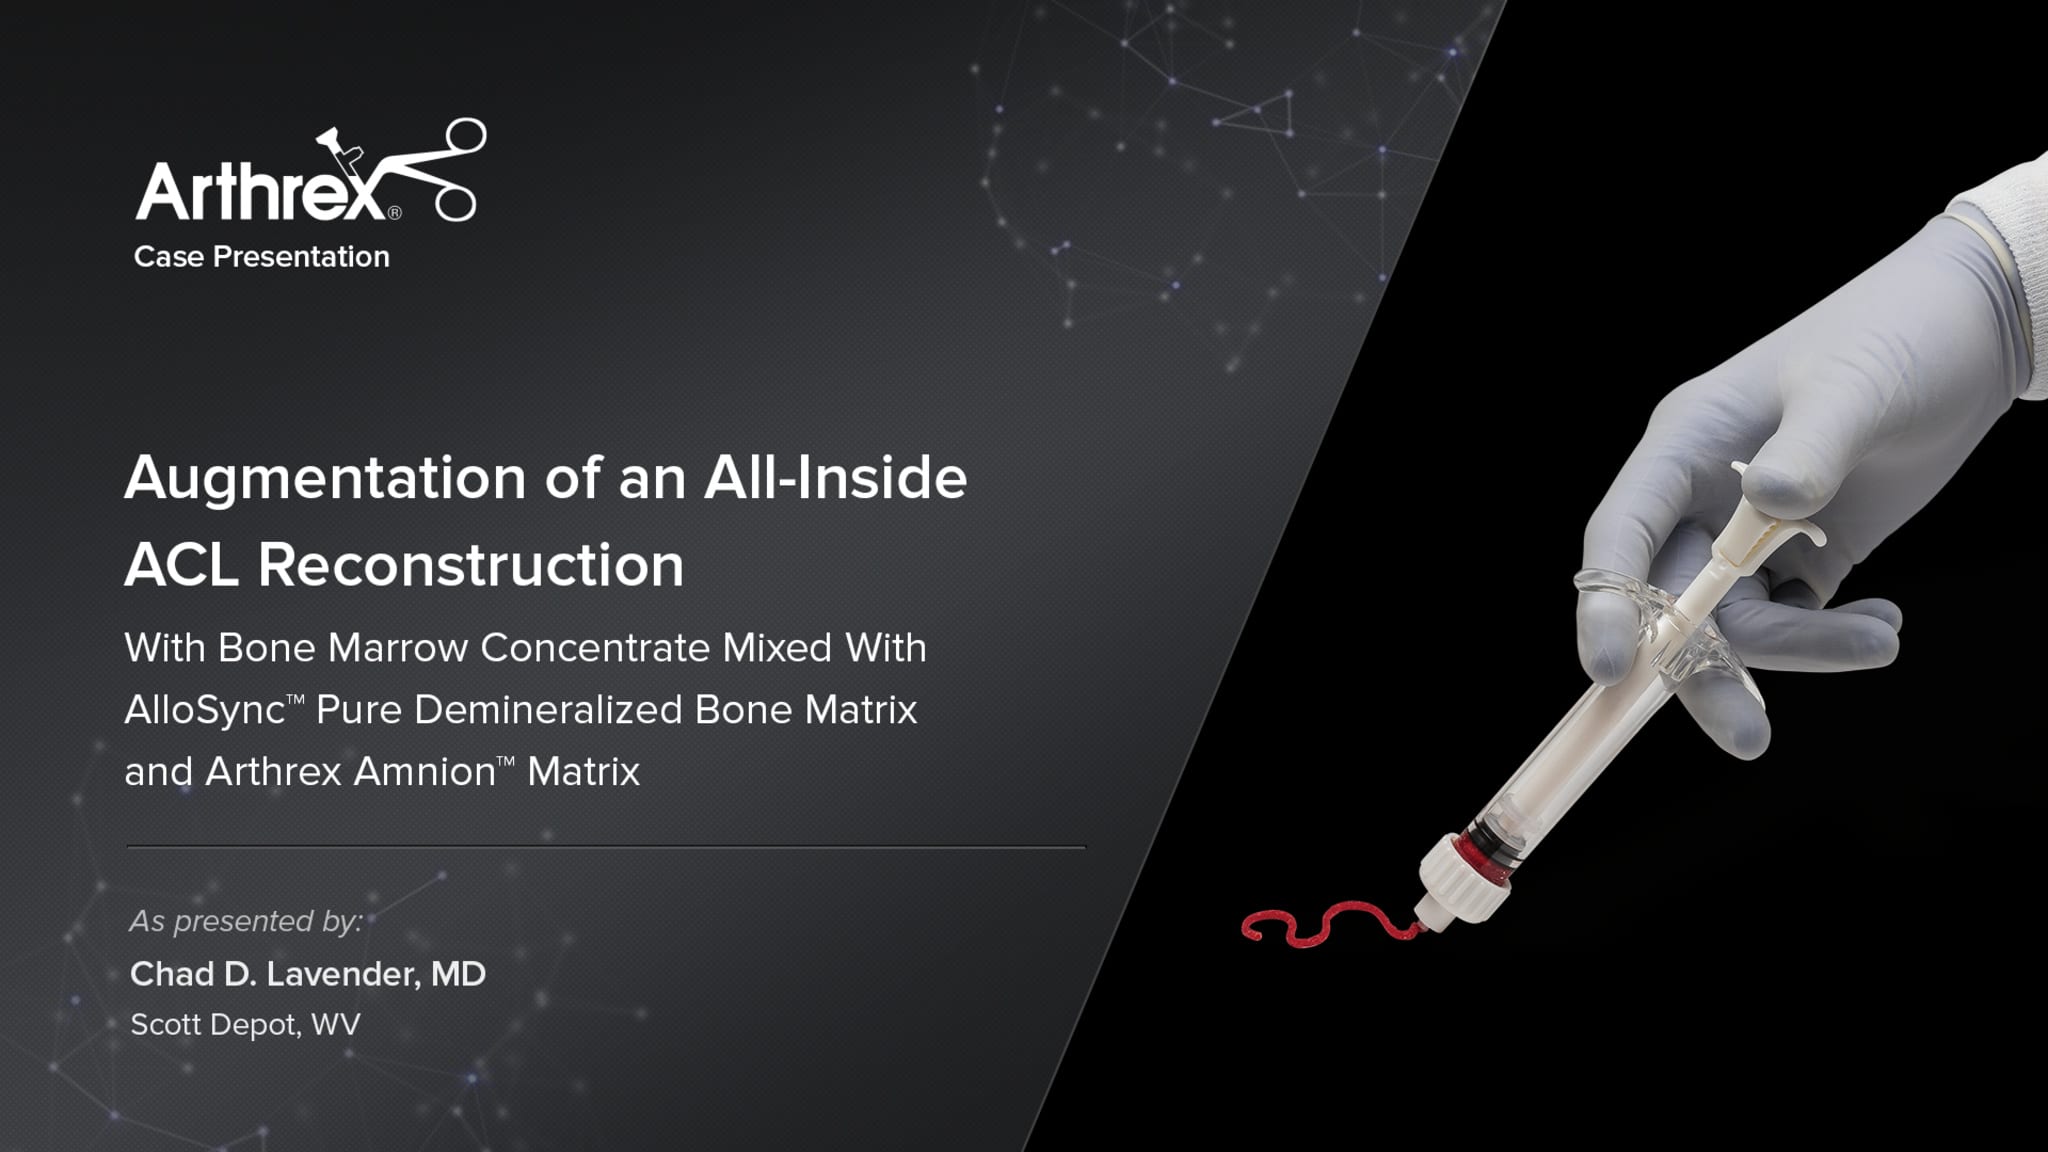 All-Inside ACL Reconstruction Augmented With AlloSync™ Pure